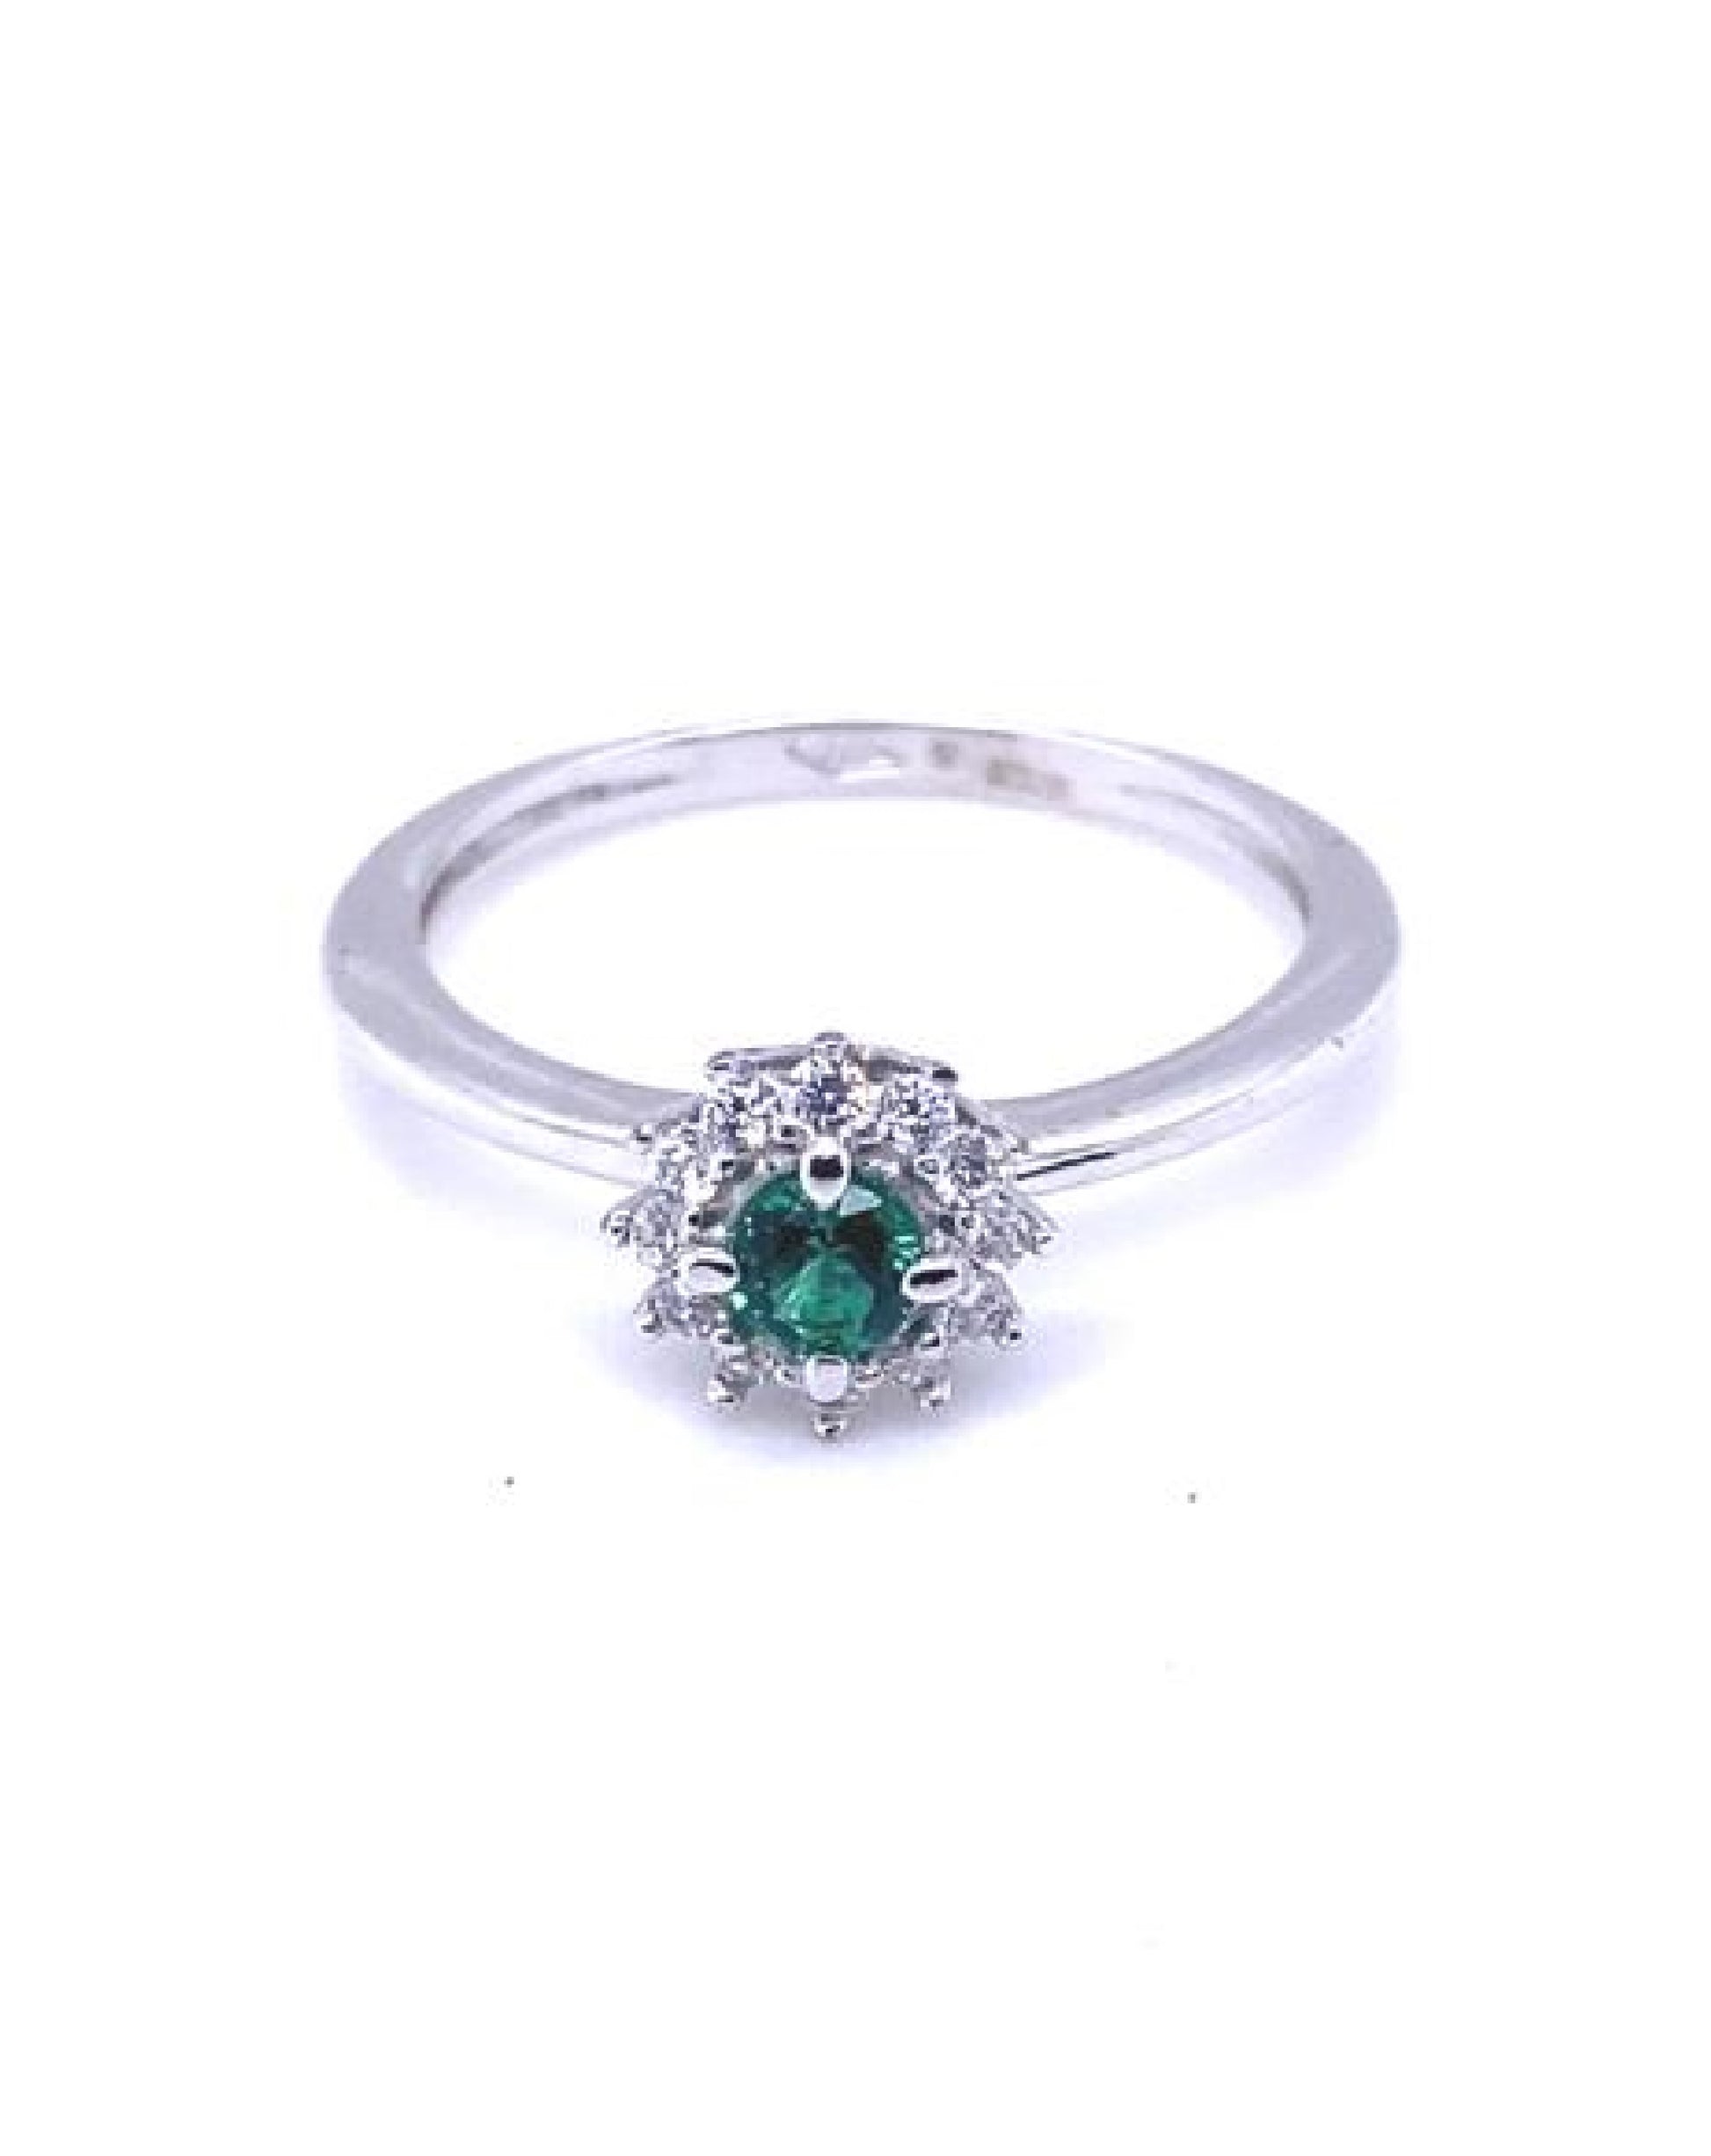 Gold 18 kt White Gold White & Green Sapphires Ring Jewelry